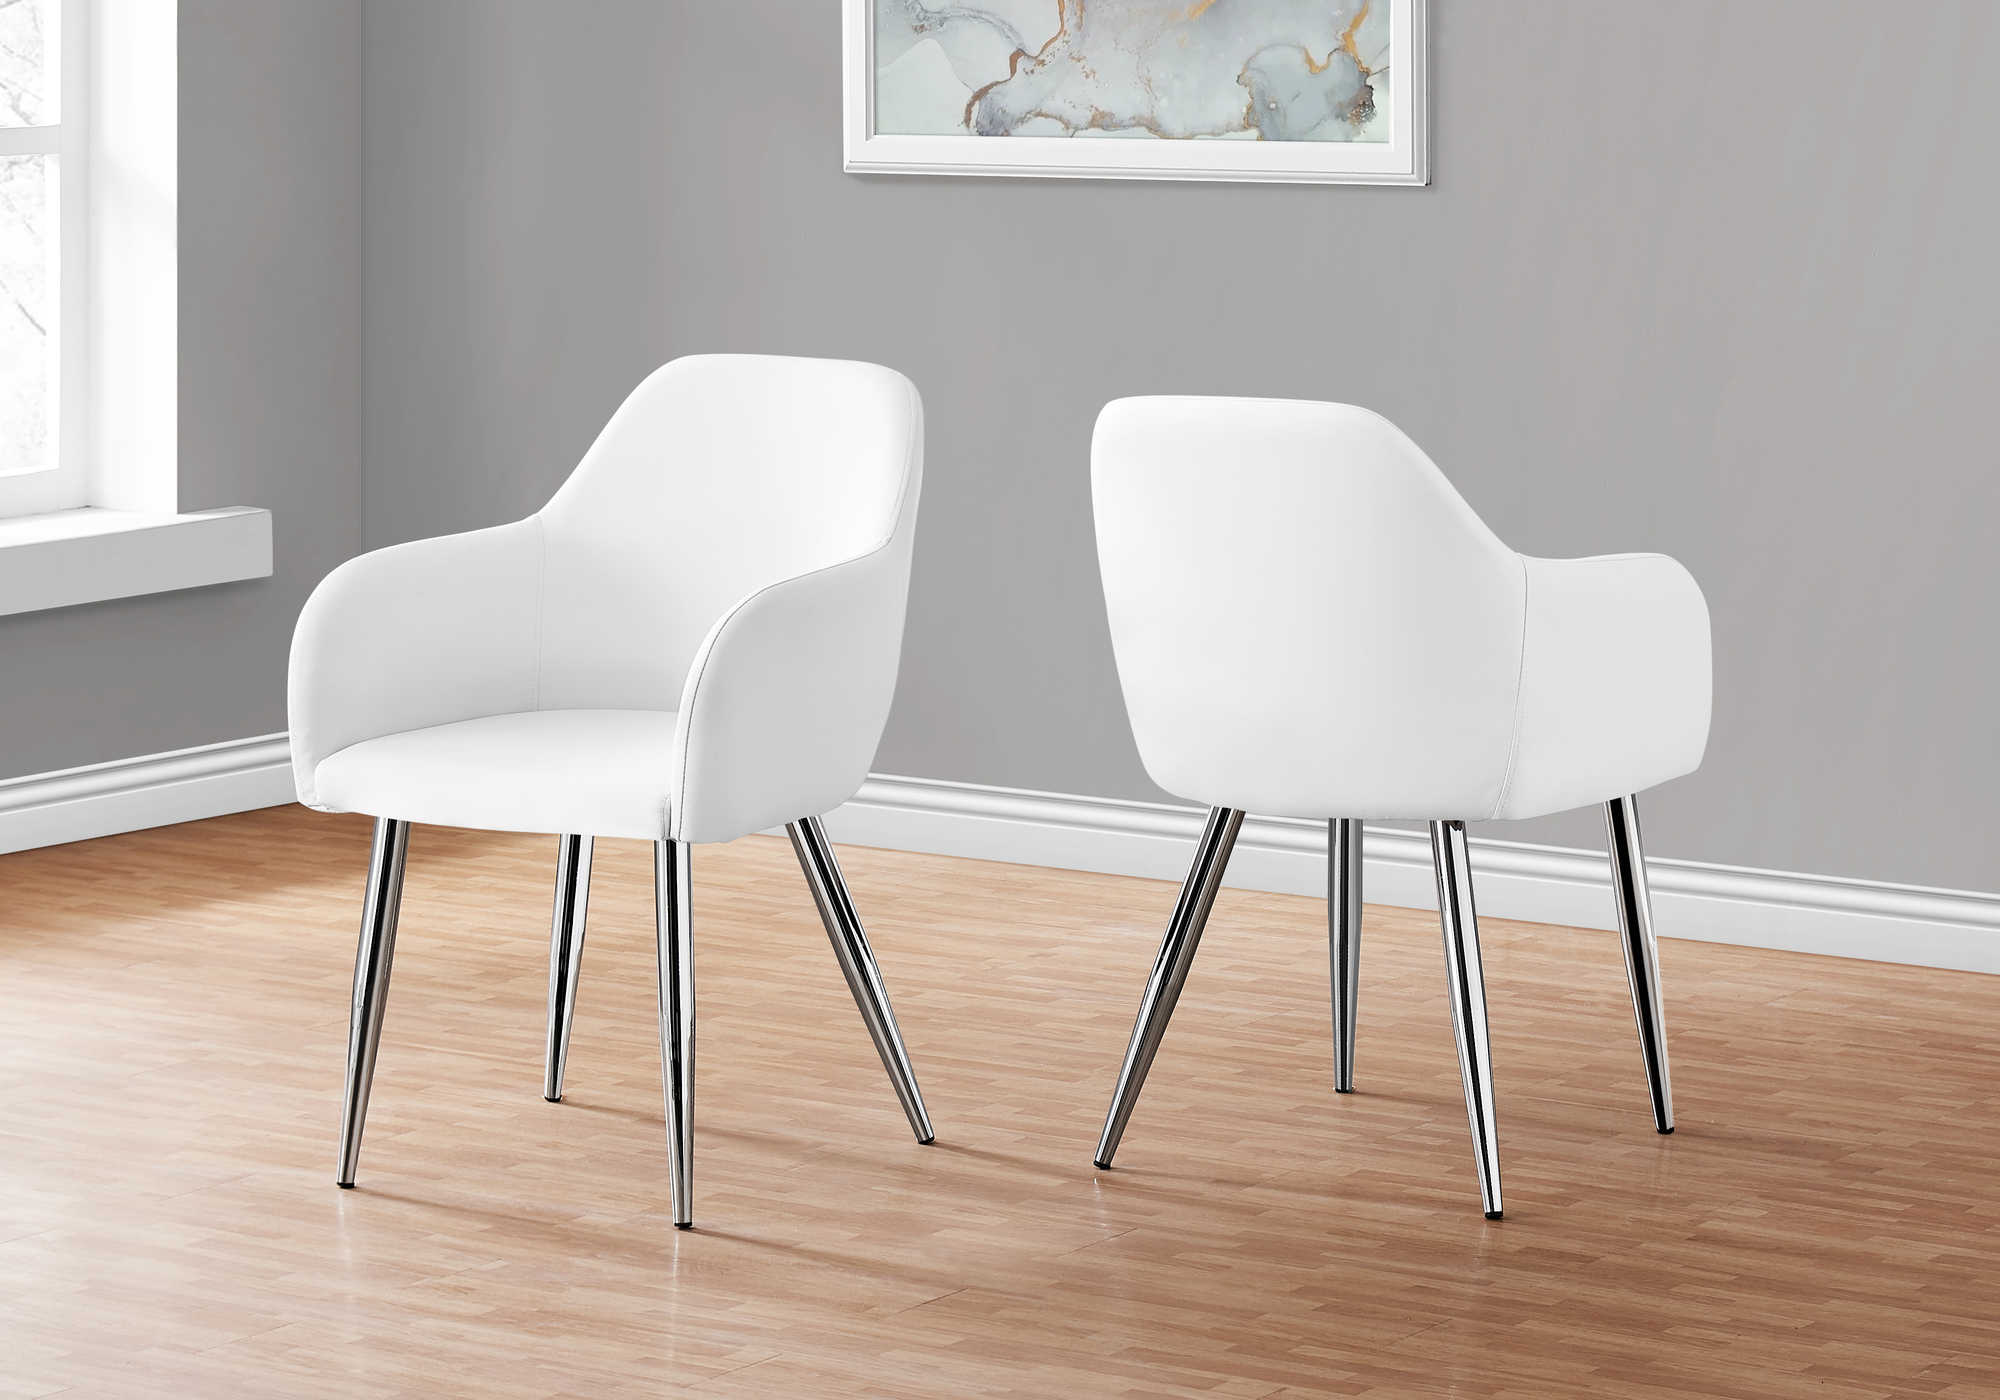 DINING CHAIR - 2PCS / 33"H / WHITE LEATHER-LOOK / CHROME